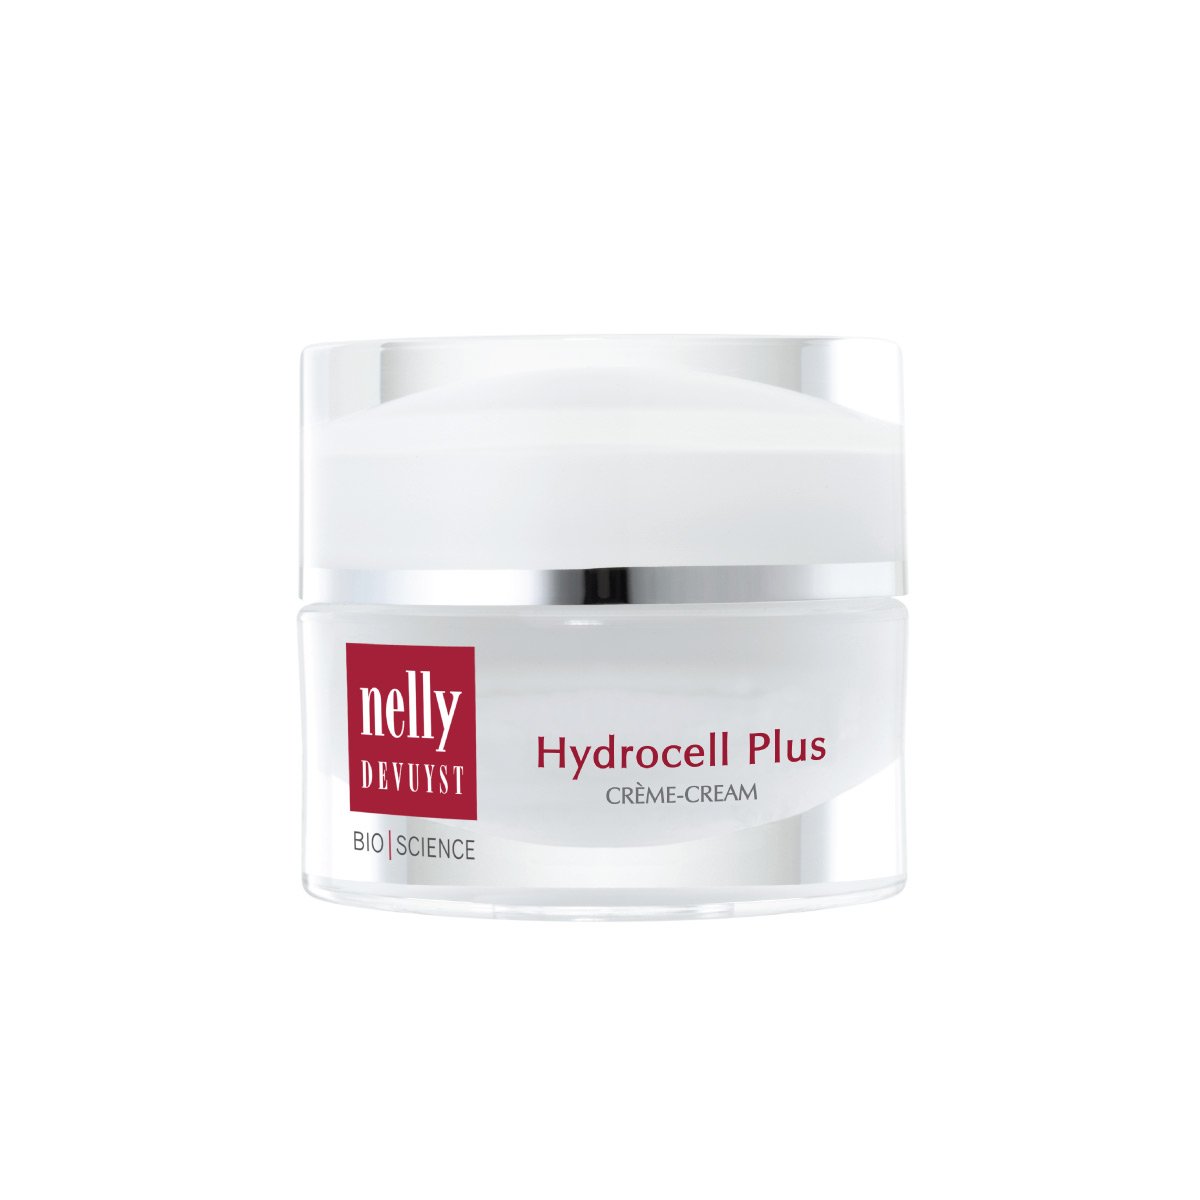 Crème Hydrocell Plus Bioscience - Nelly Devuyst